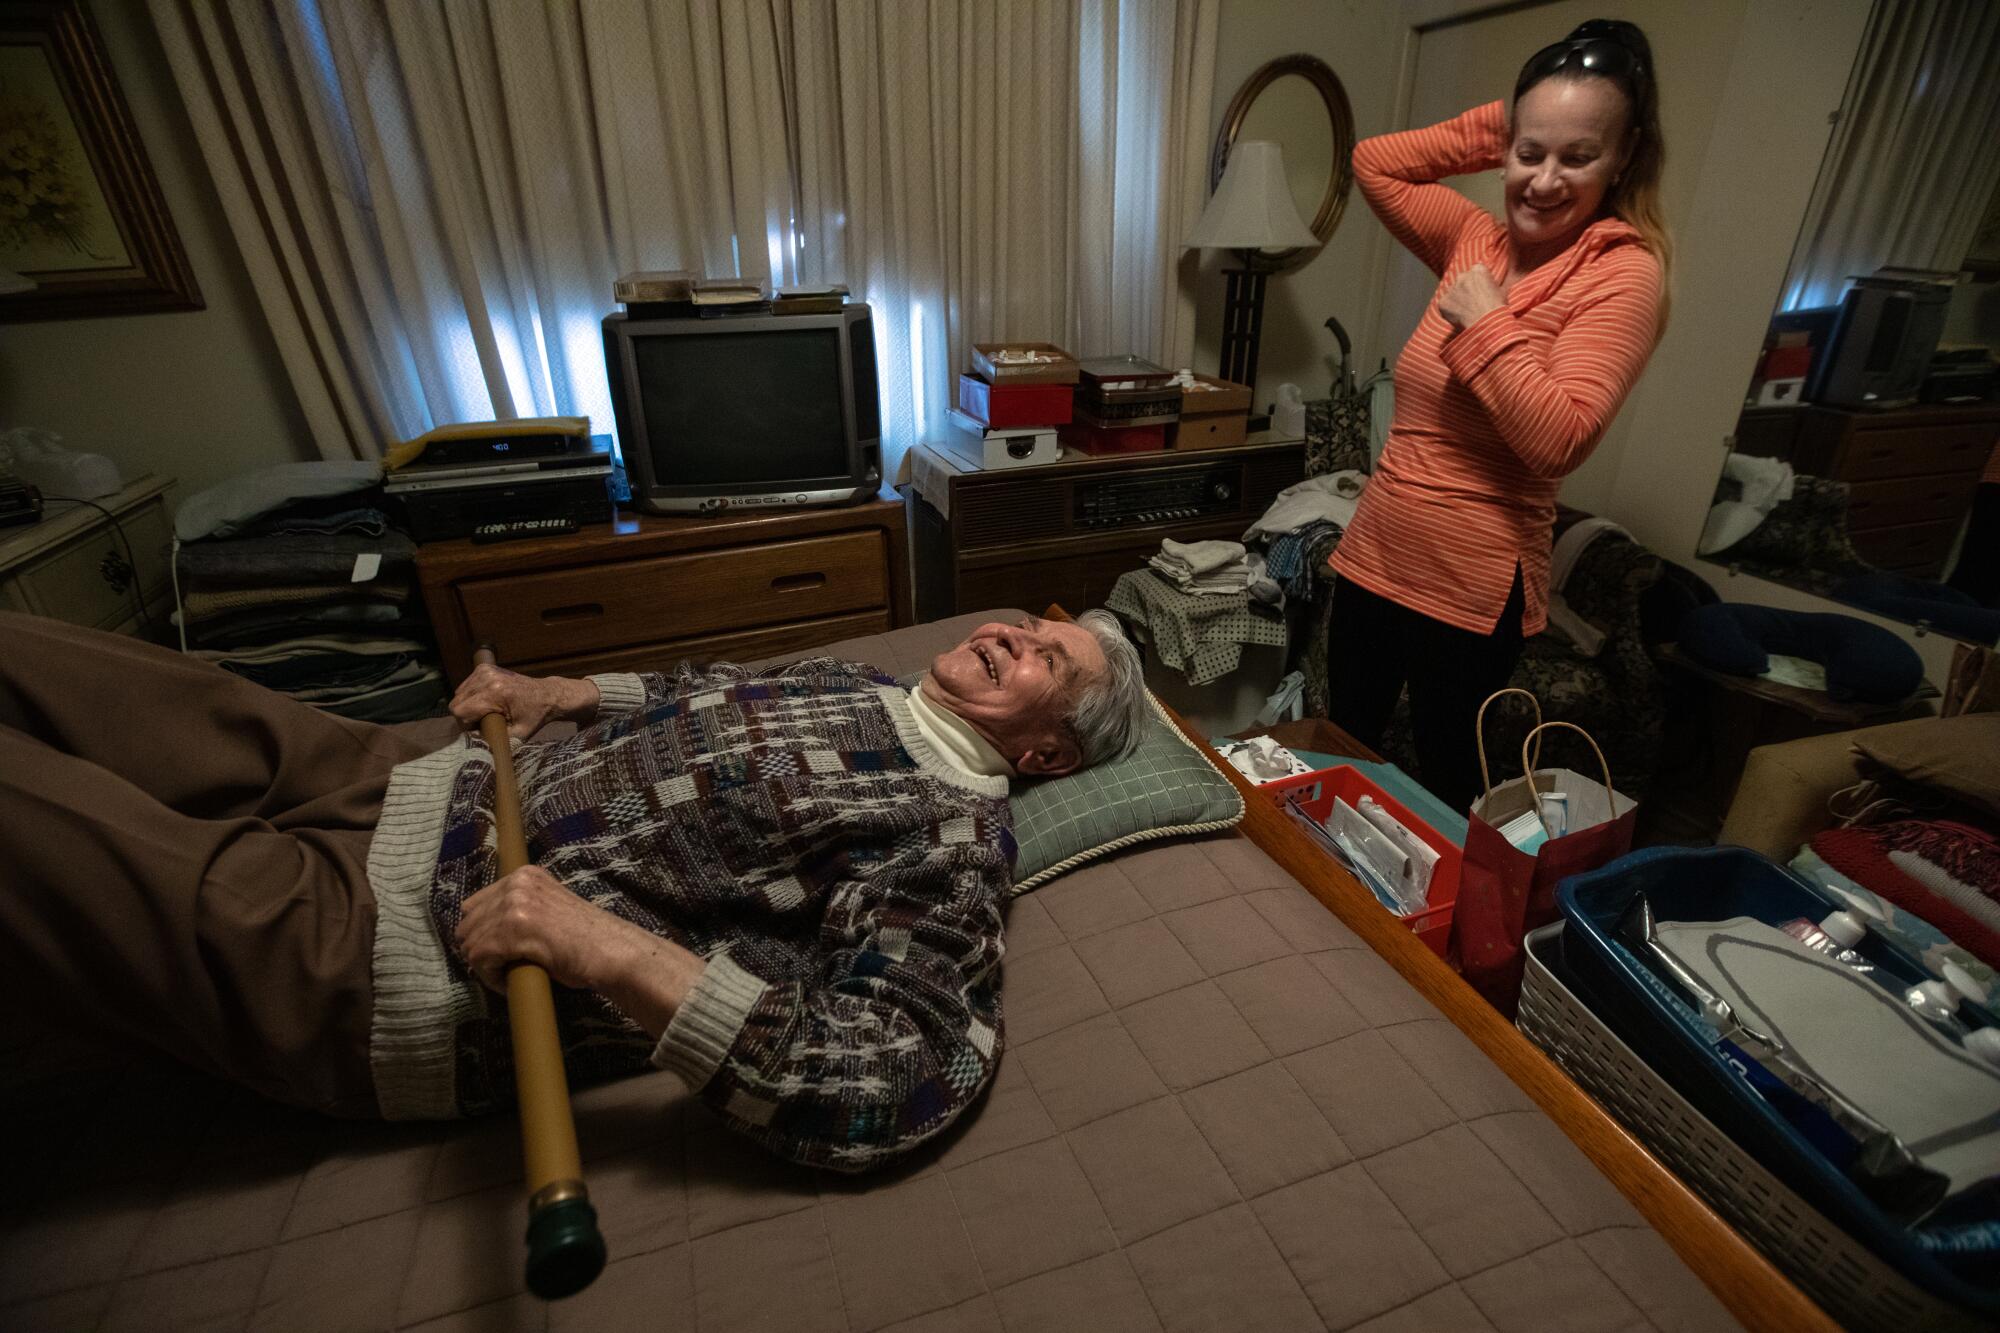 Steve Hideg, 91, left, is doing his physical therapy at home